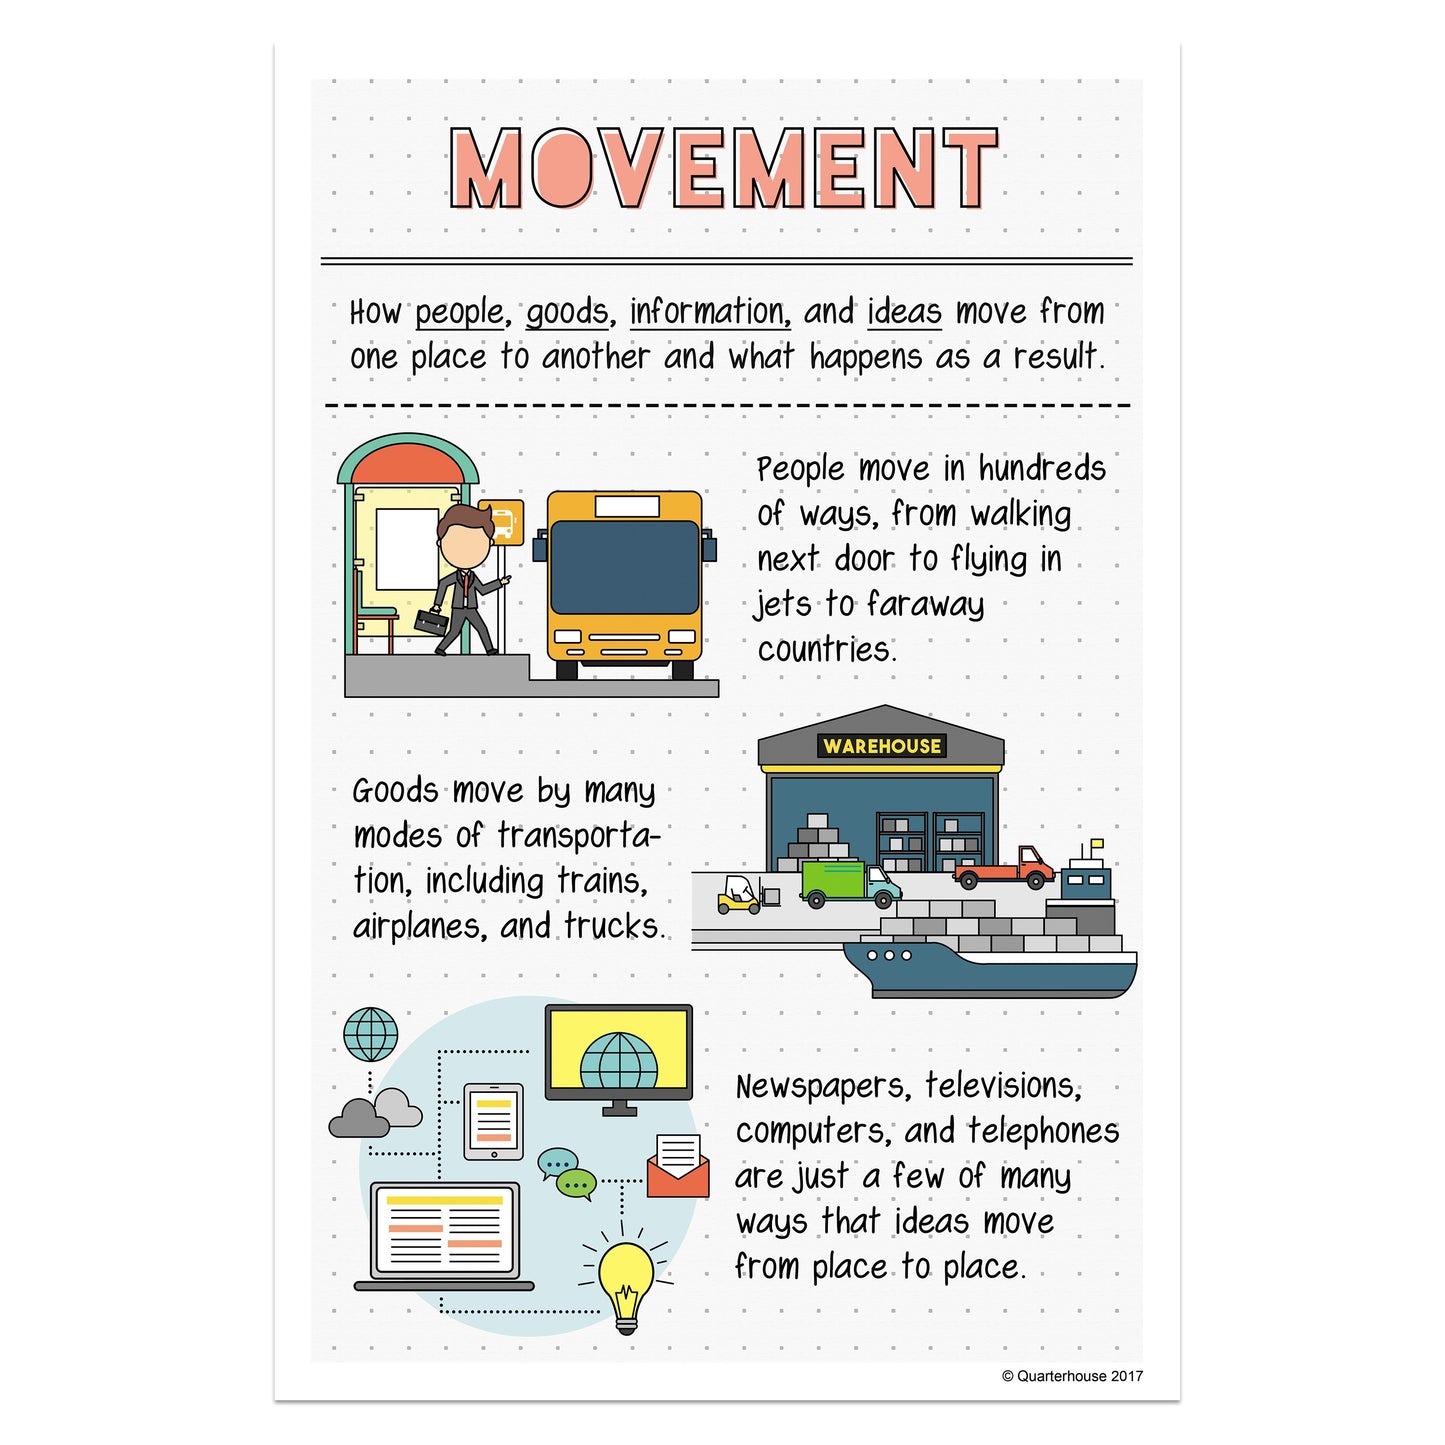 Quarterhouse 5 Themes of Geography - Movement Poster, Social Studies Classroom Materials for Teachers